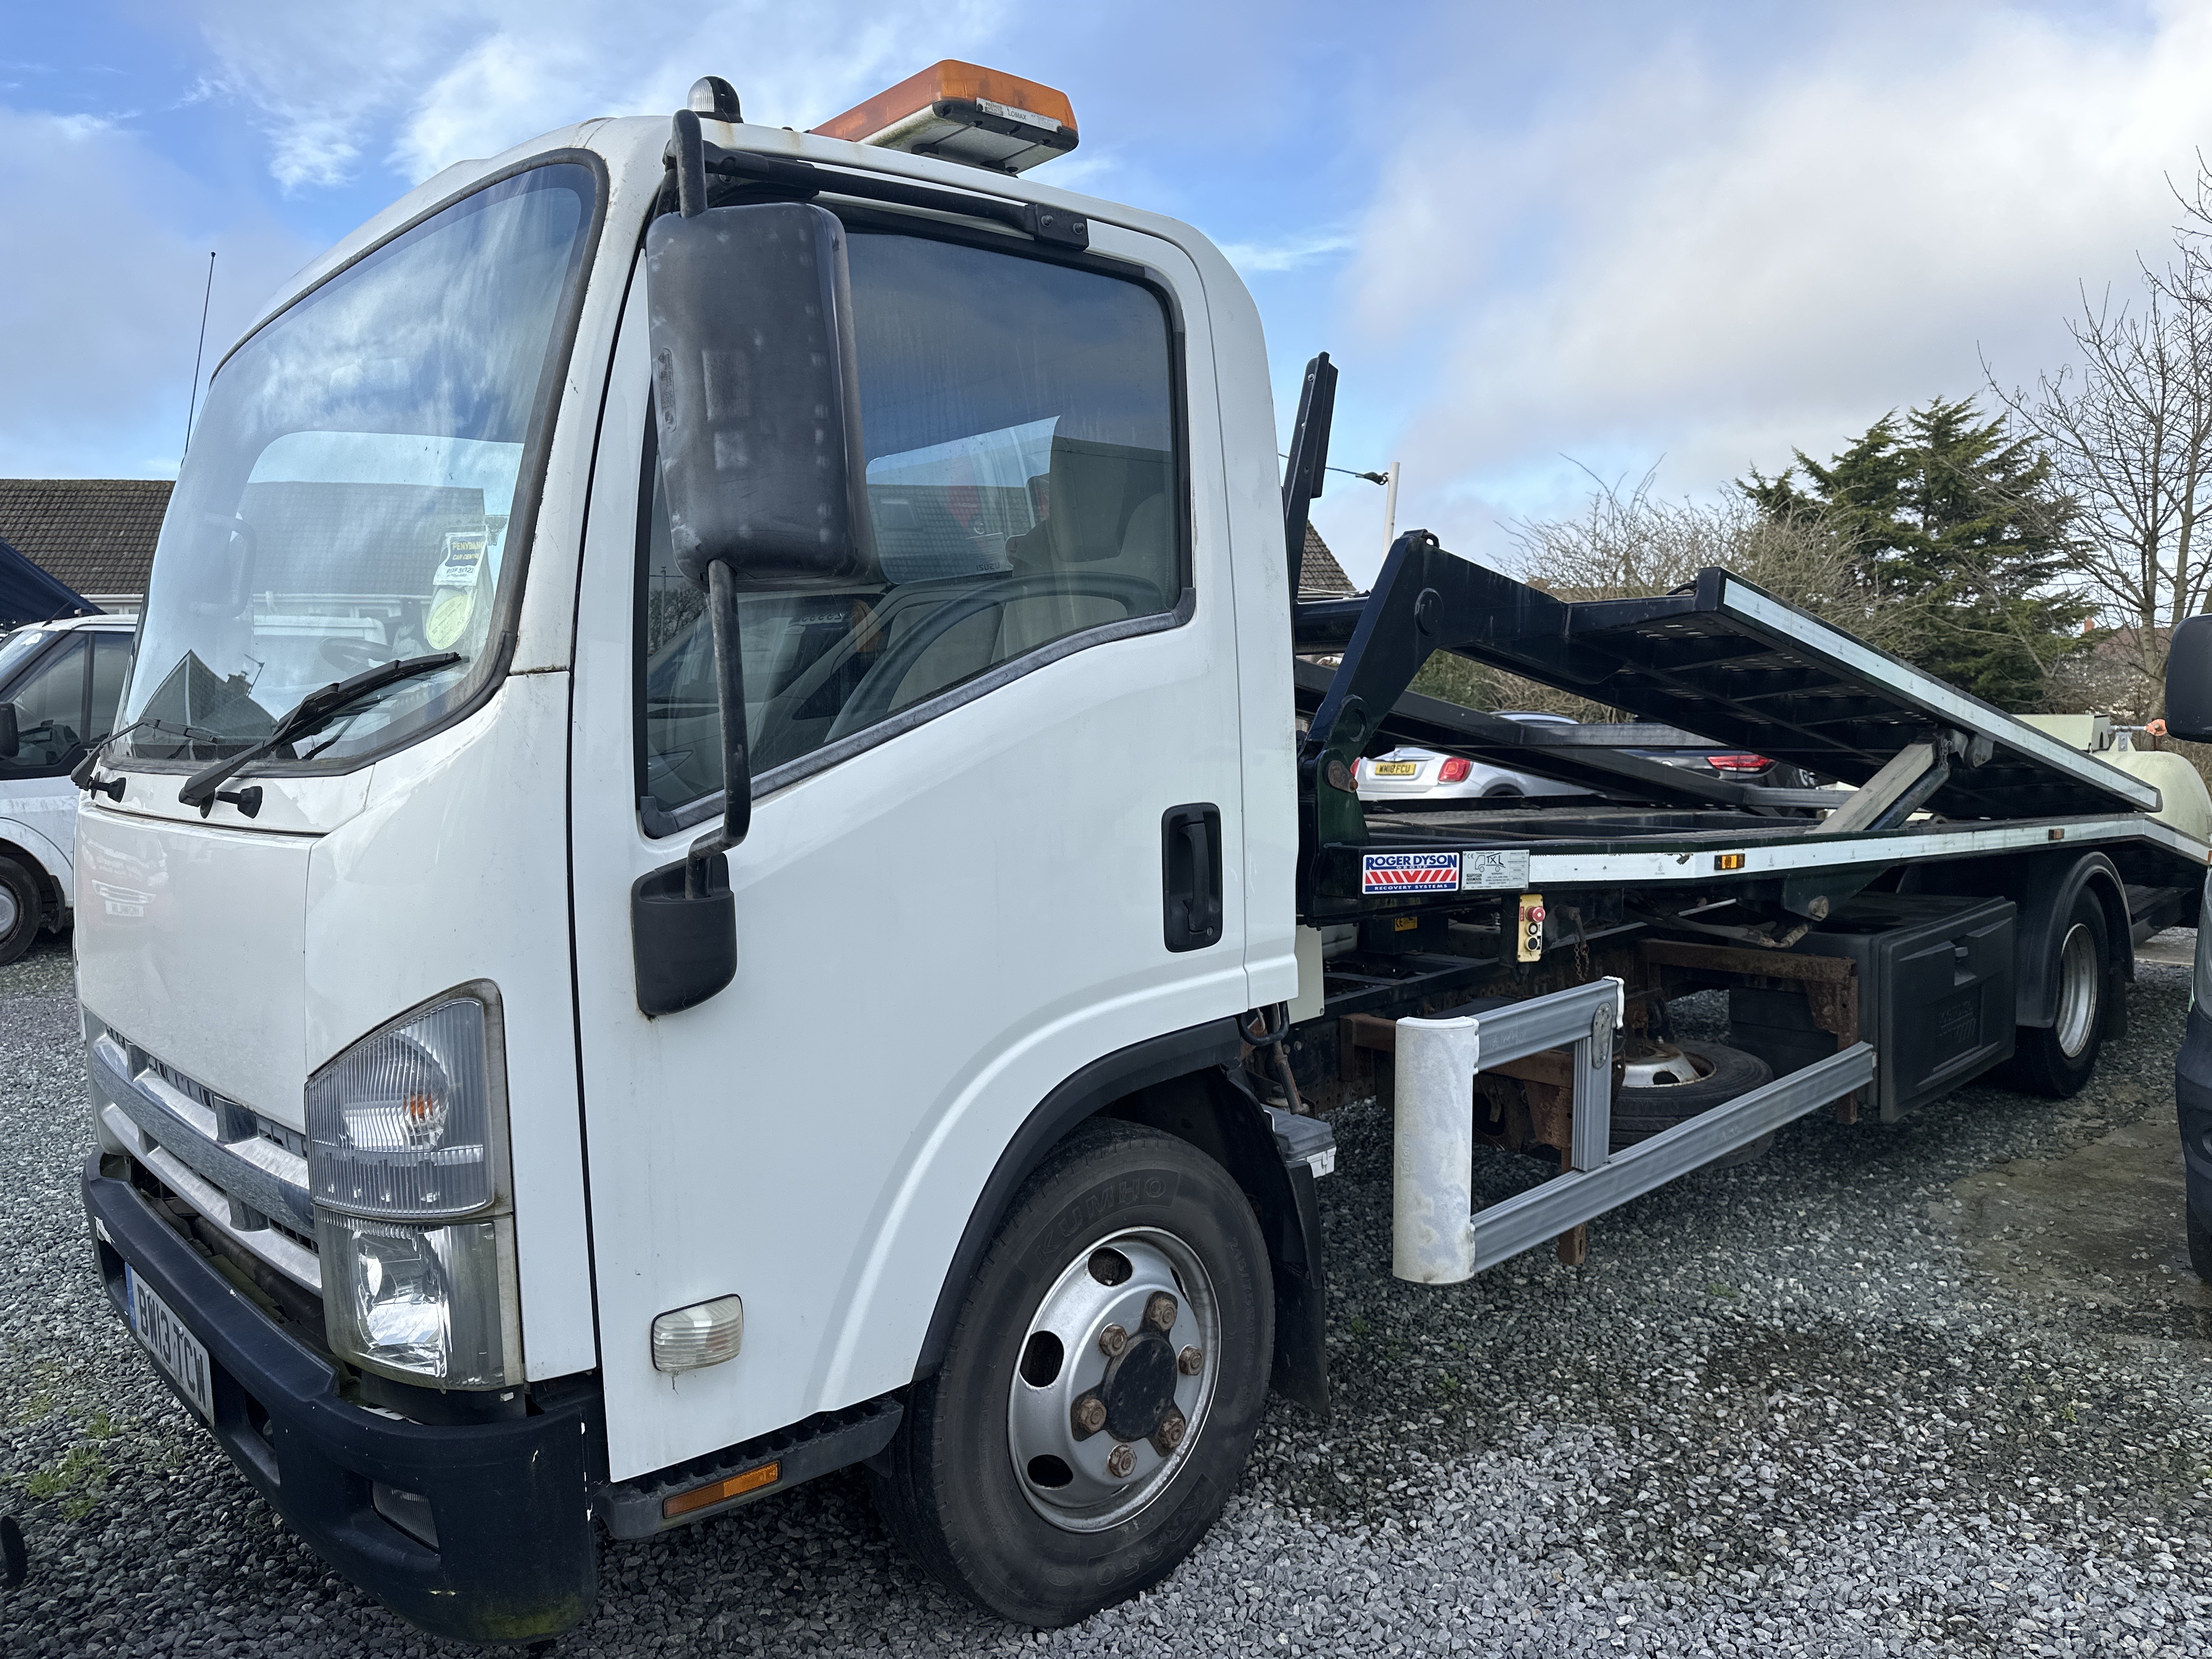  ISUZU TRUCK TWIN CAR TRANSPORTER for sale at Mike Howlin Motor Sales Pembrokeshire